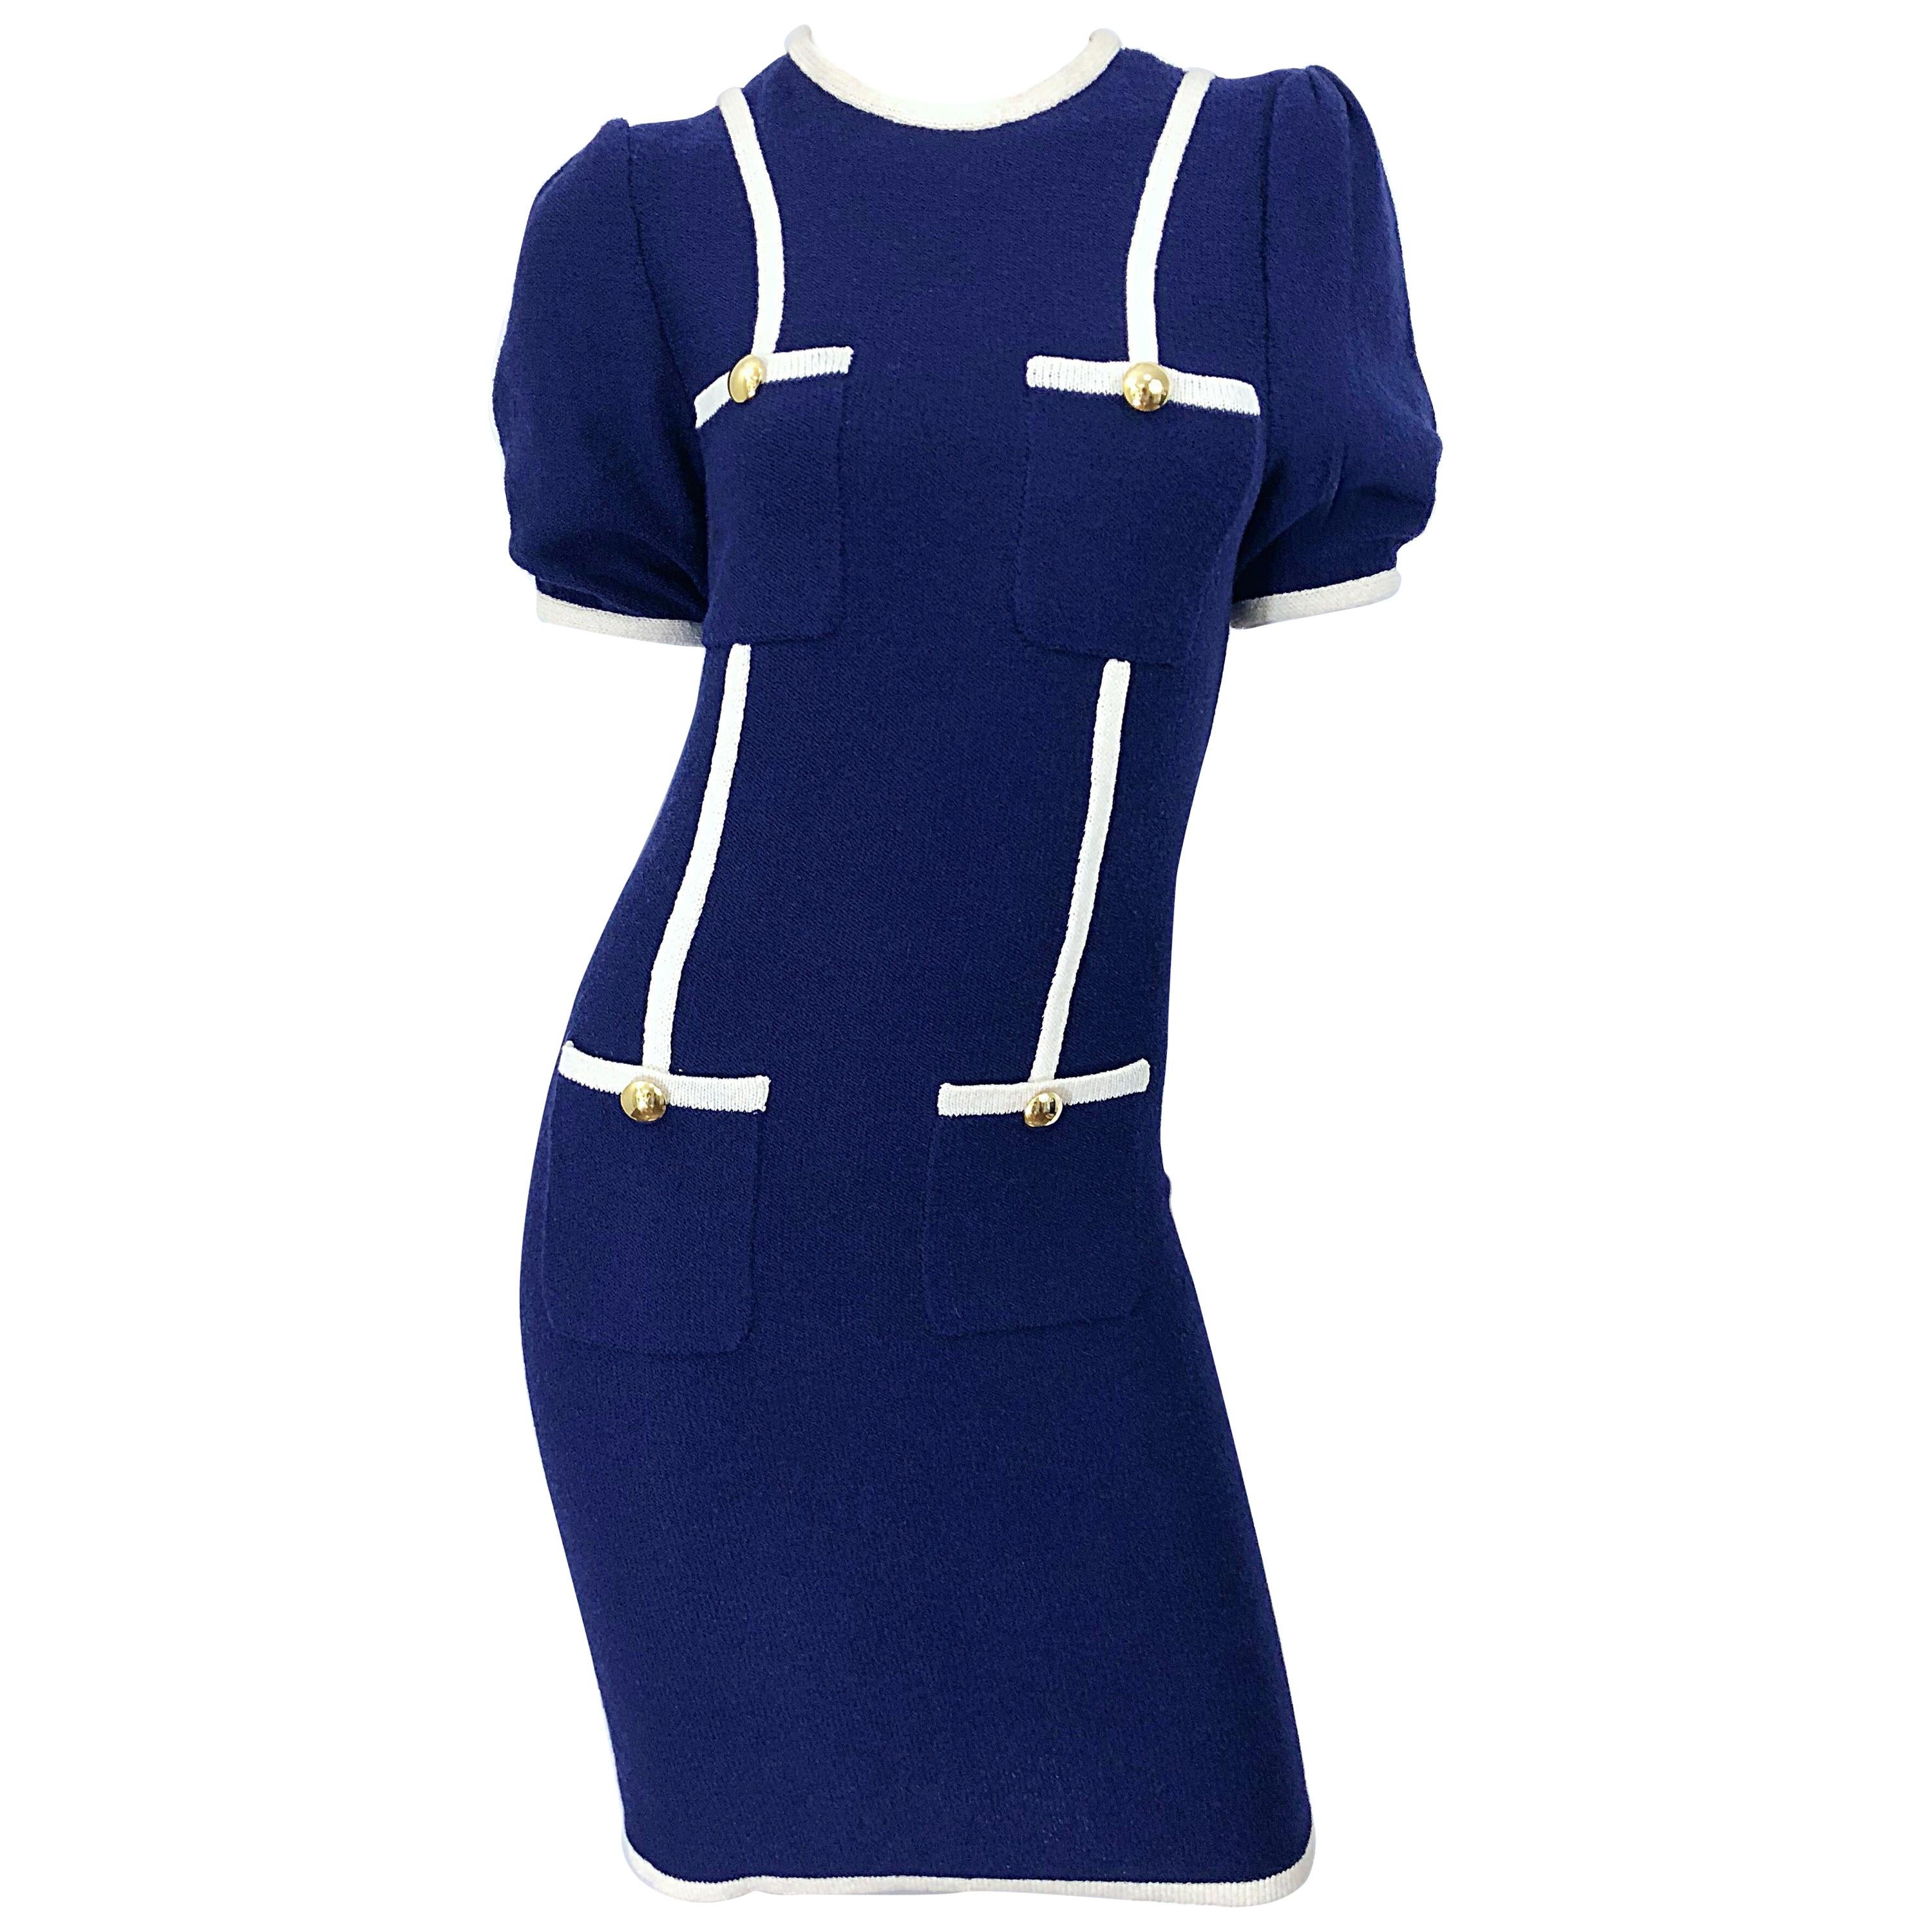 Vintage Adolfo for Saks 5th Avenue Navy Blue and White Nautical Knit Dress